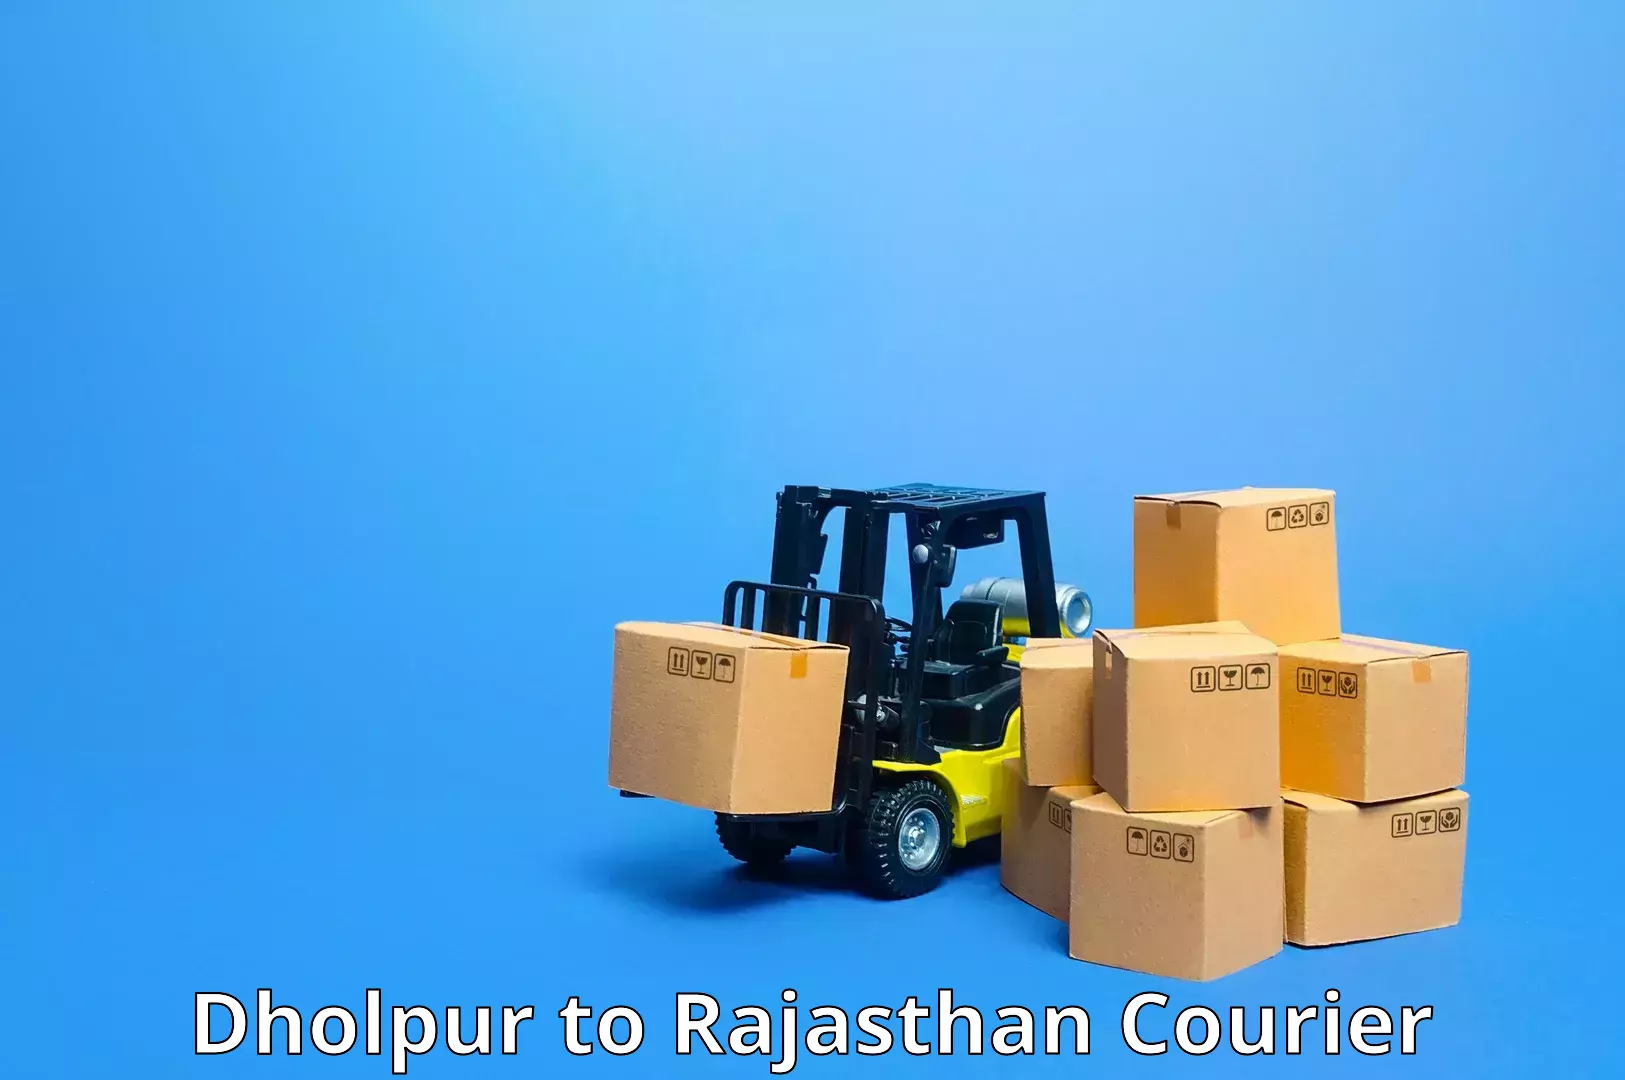 Global shipping solutions Dholpur to Sirohi